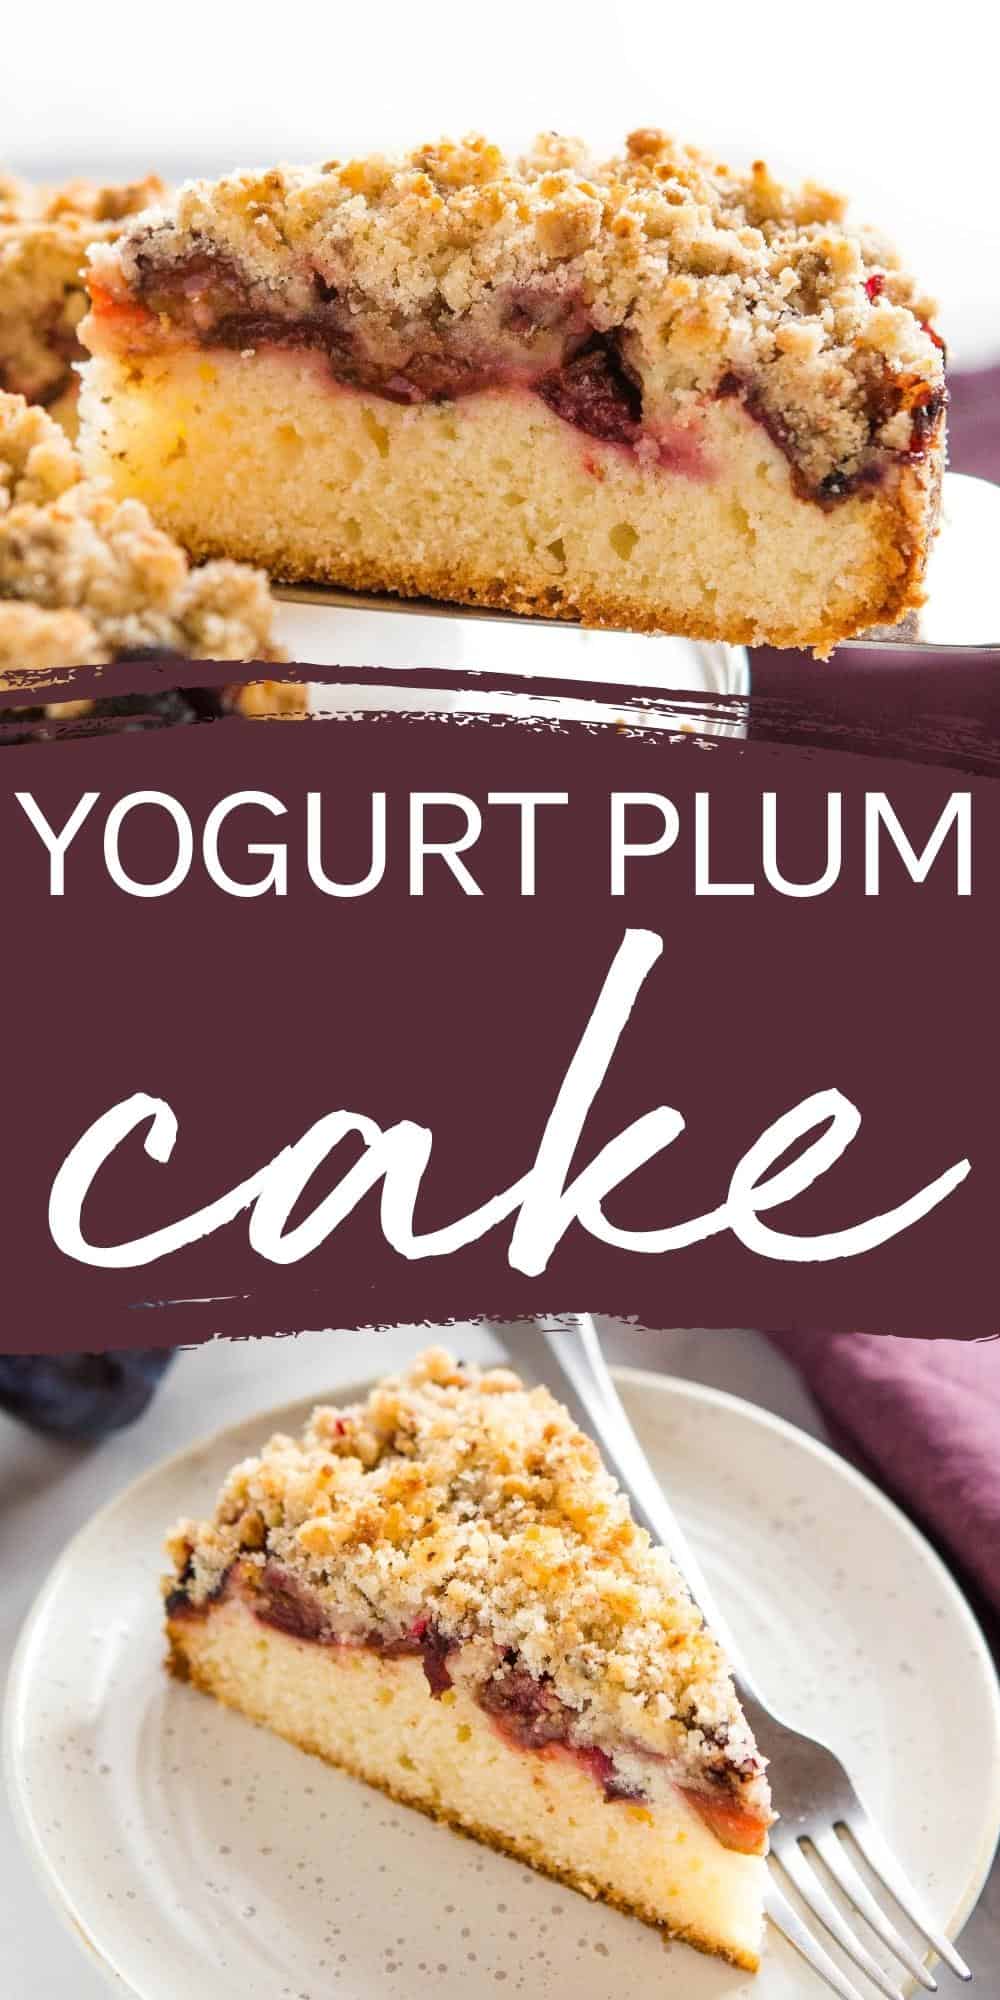 This Yogurt Plum Cake is the perfect easy fall and winter dessert with a simple & tender cake base, fresh plums, and a delicious streusel topping. Recipe from thebusybaker.ca! #plumcake #yogurtplumcake #streuselcake #wintercake via @busybakerblog